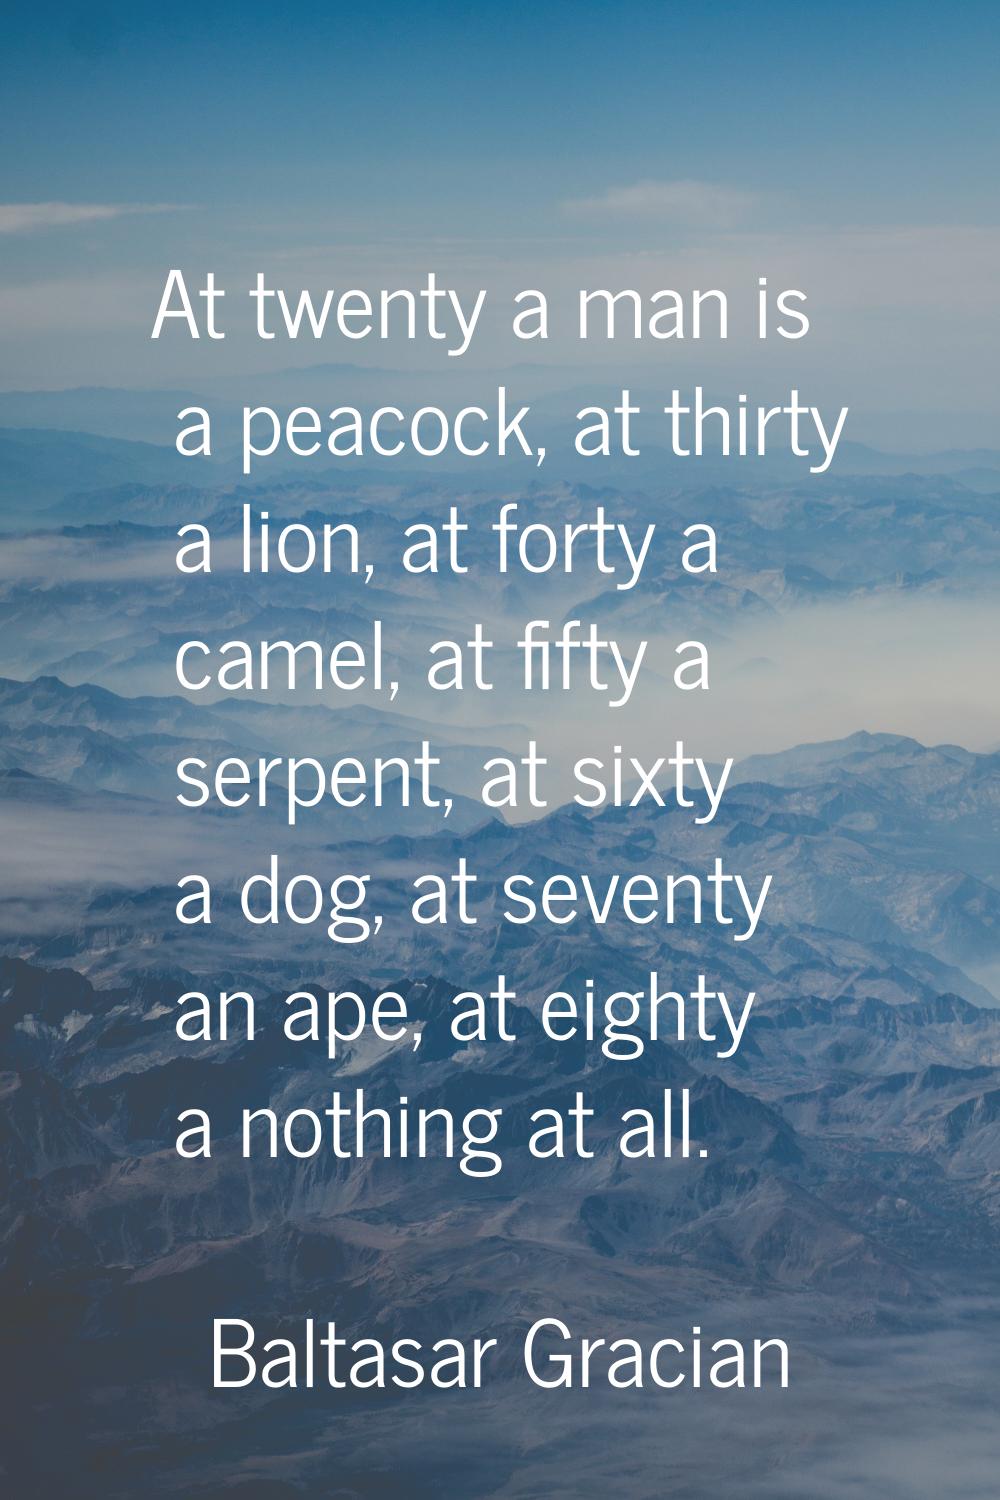 At twenty a man is a peacock, at thirty a lion, at forty a camel, at fifty a serpent, at sixty a do